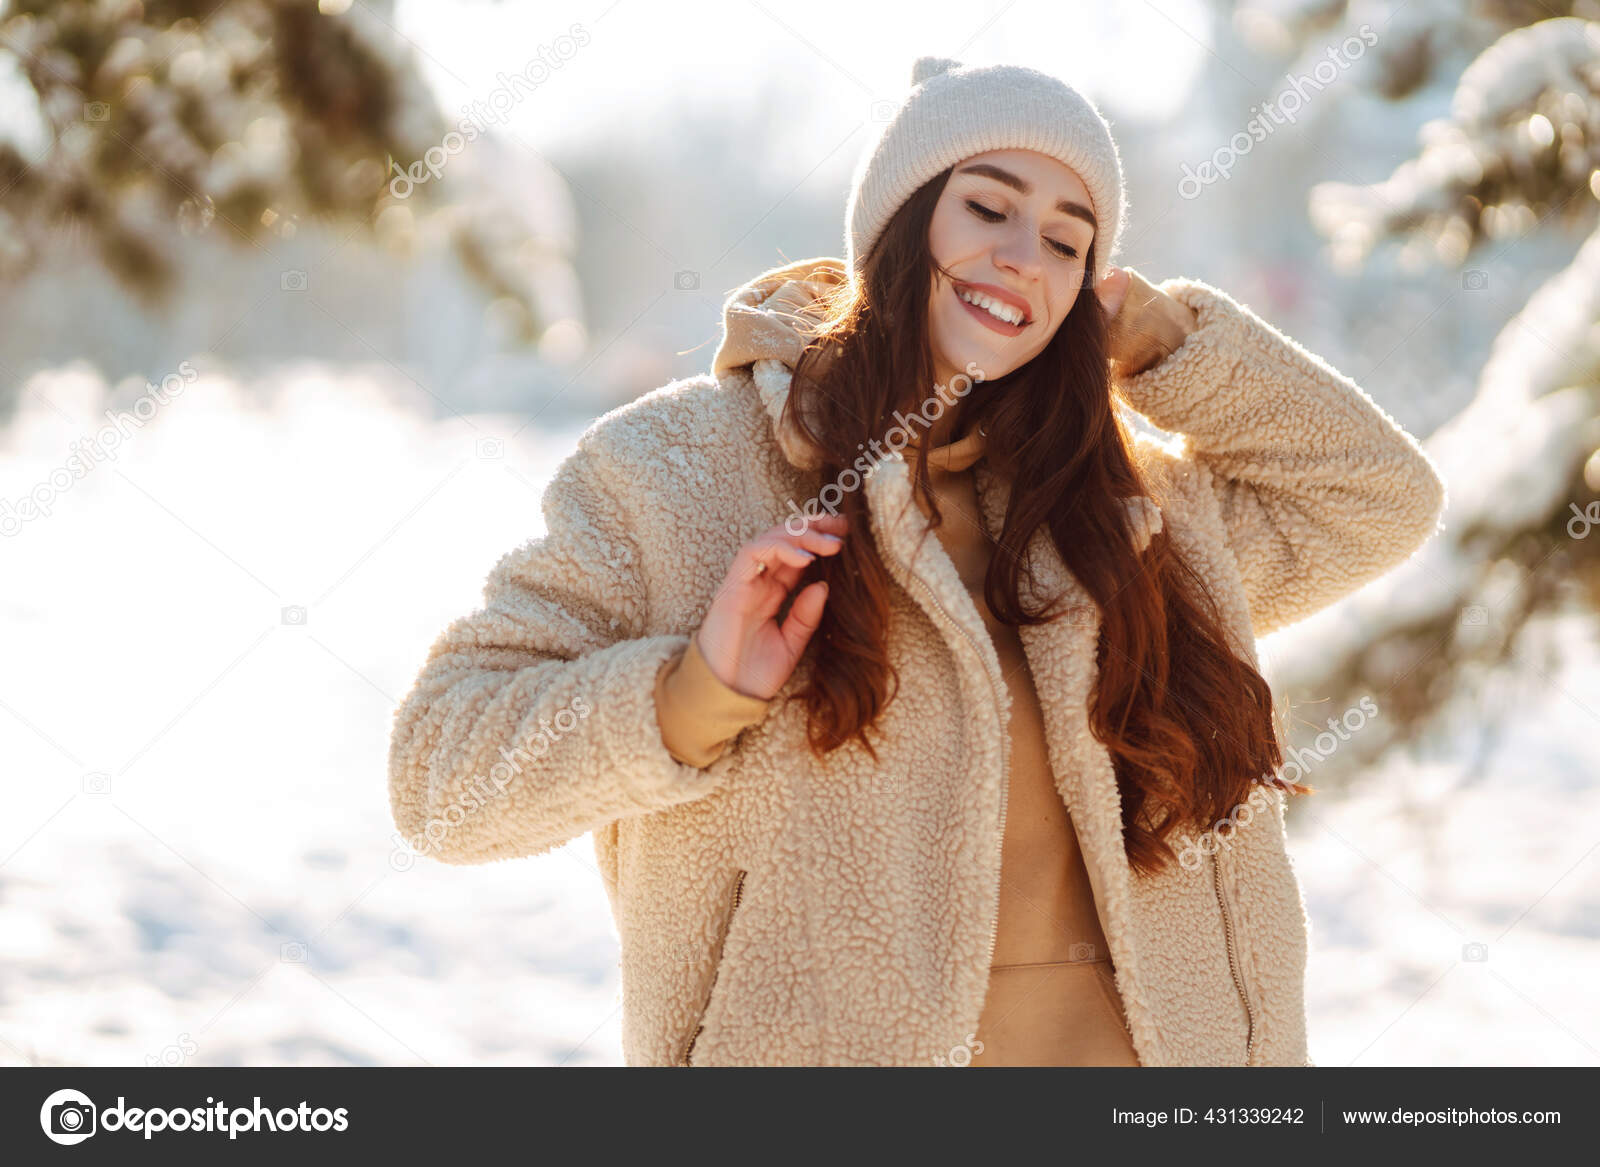 Woman in winter clothes on a walk in the park. There is a lot of